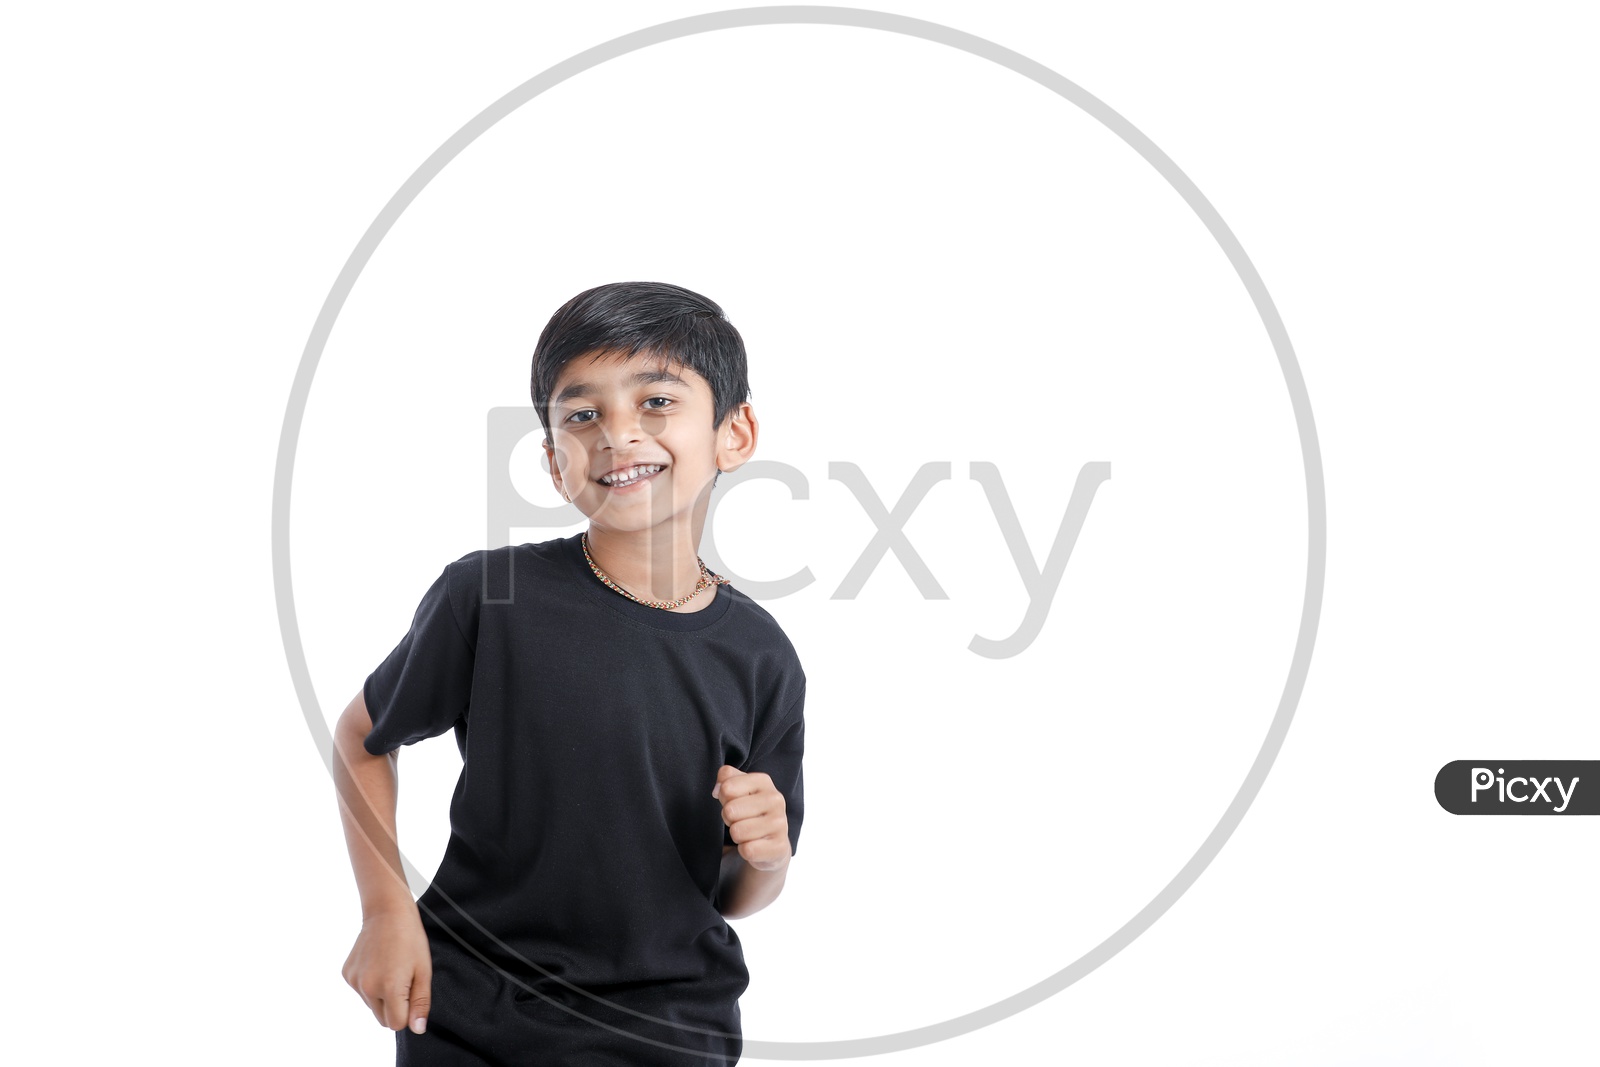 Indian or Asian boy Or Kid  with Expression and Smile Face On an Isolated White Background